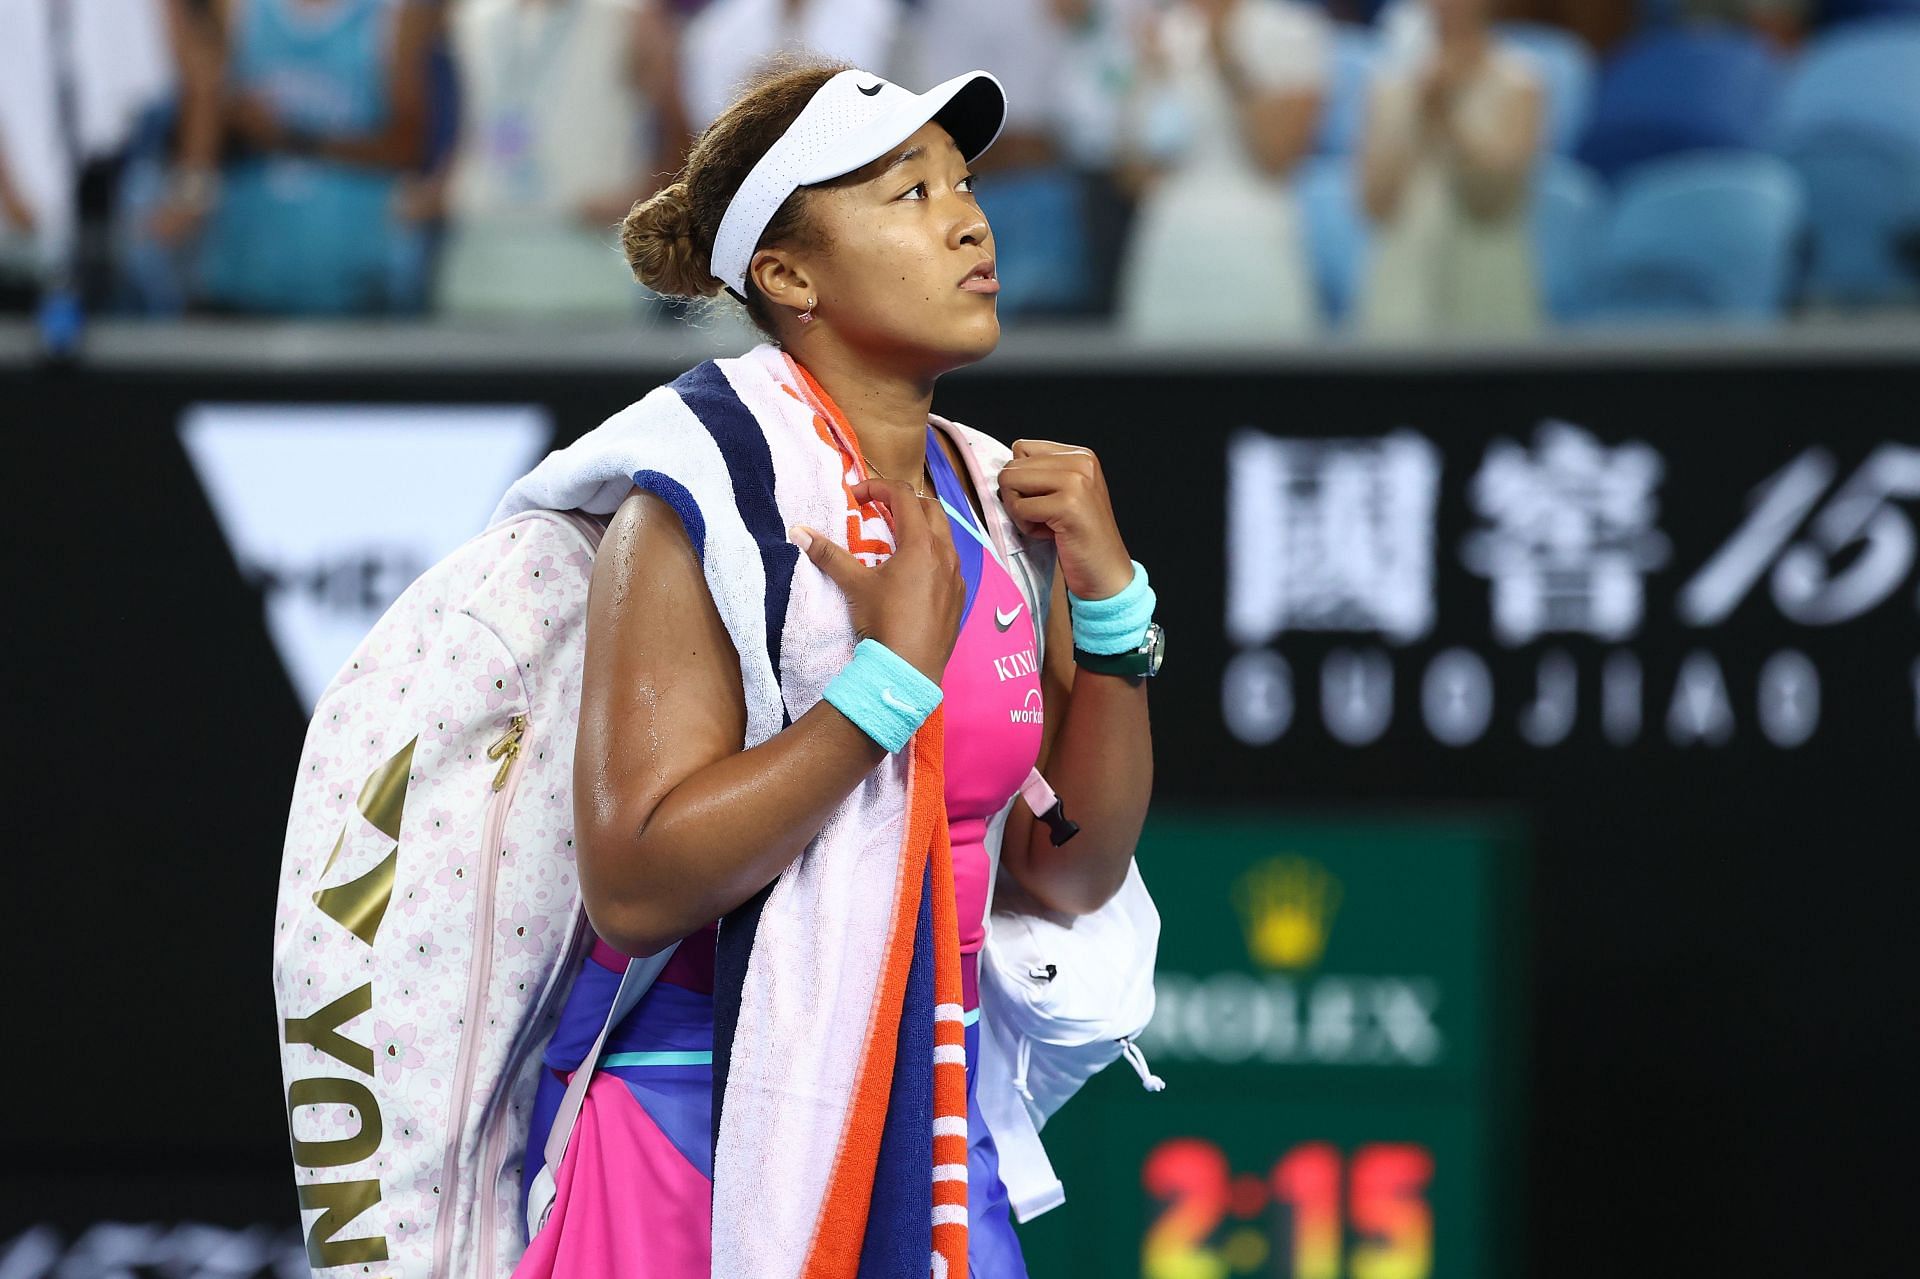 The defending champion had an unceremonious end to her 2022 Australian Open campaign